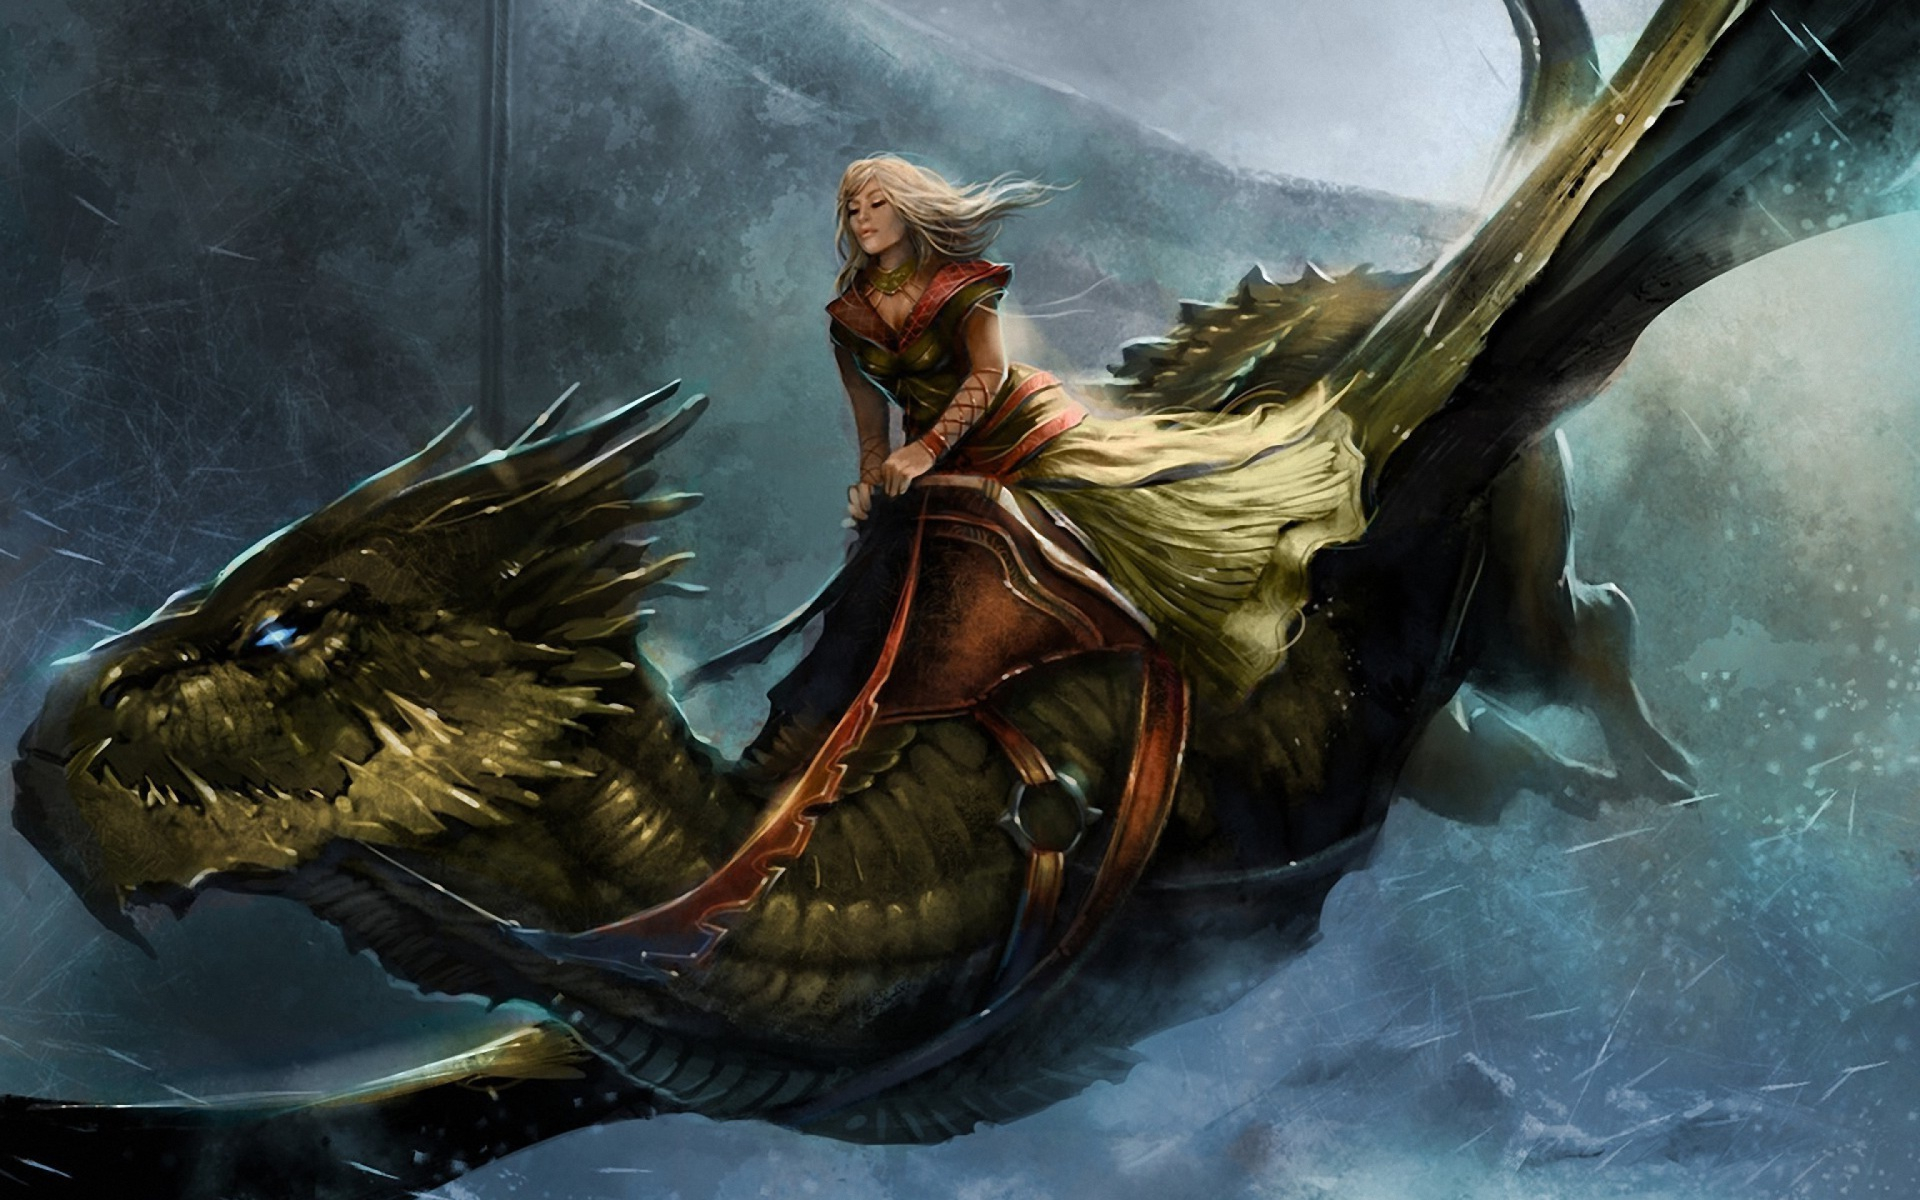 1920x1200 A Song of Ice and Fire Roleplaying Wallpaper for Widescreen Desktop PC 1920x1080 Full HD